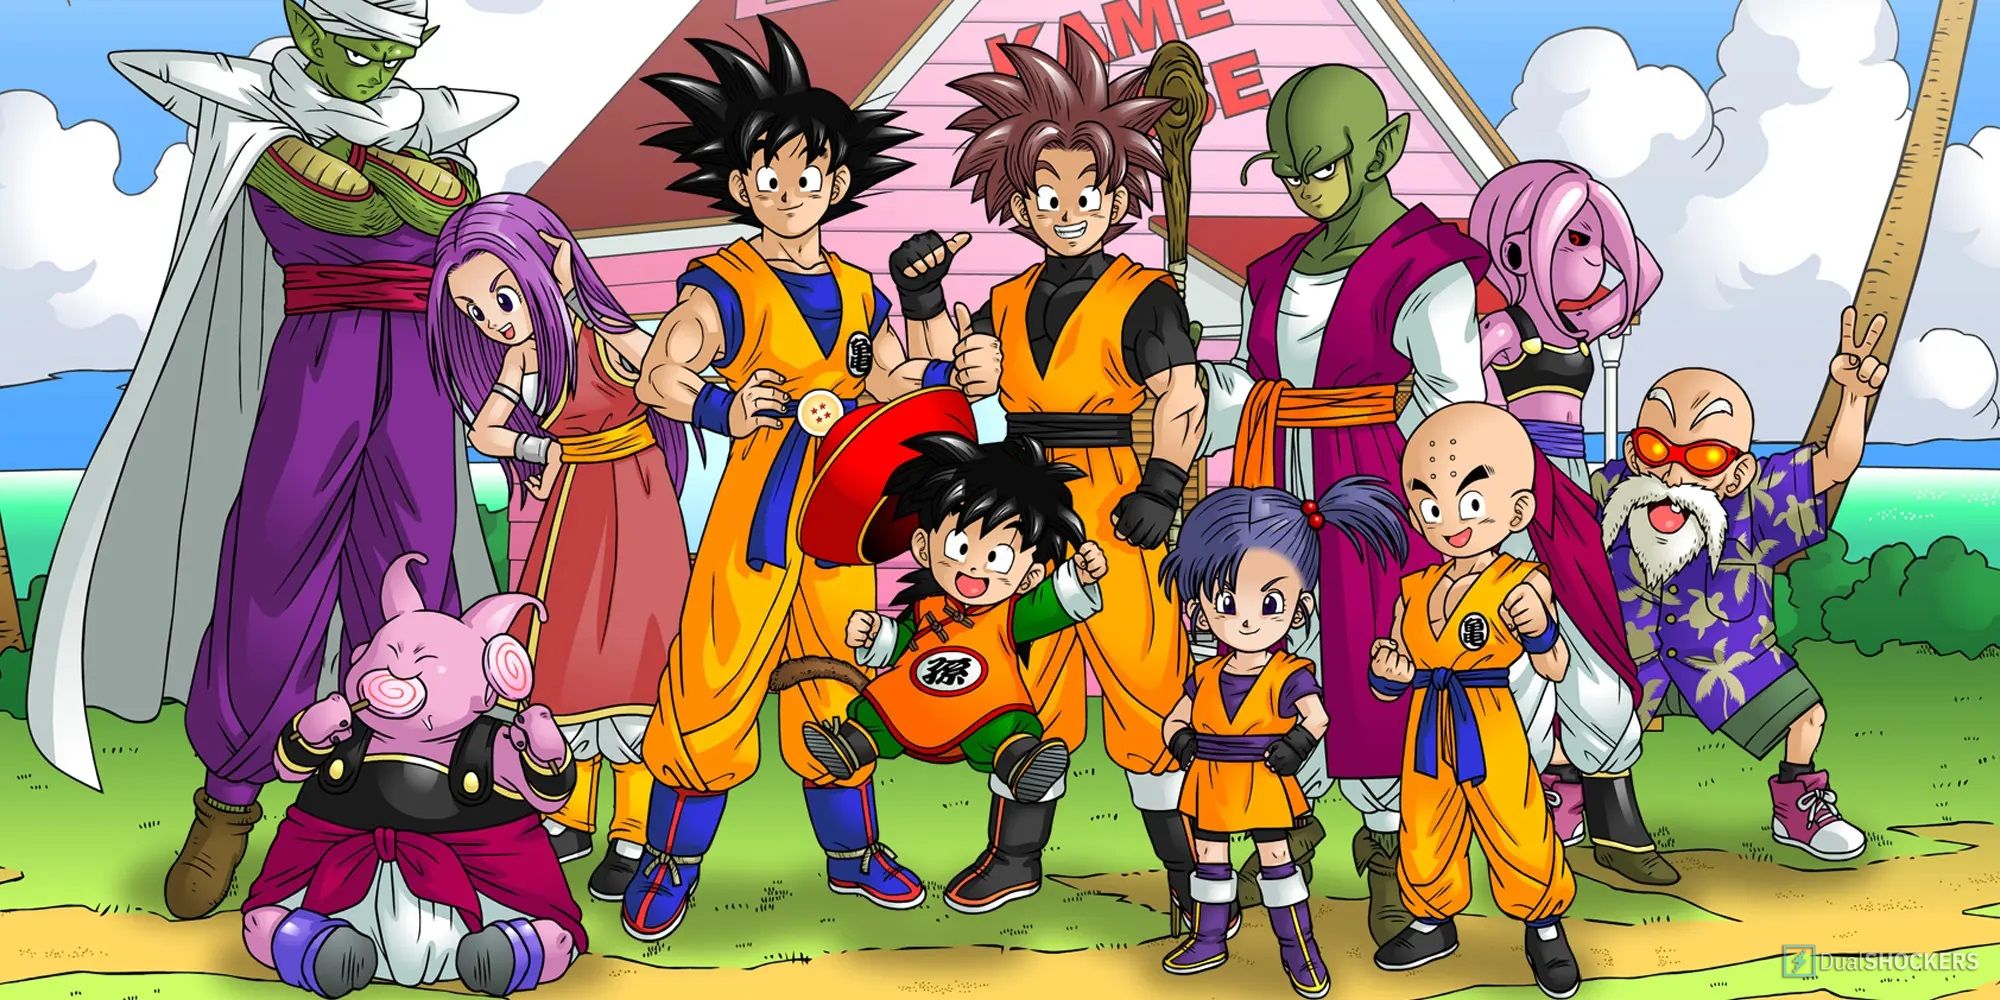 The Main Dragon Ball Heroes And Online Original Heroes From Dragon Ball Online